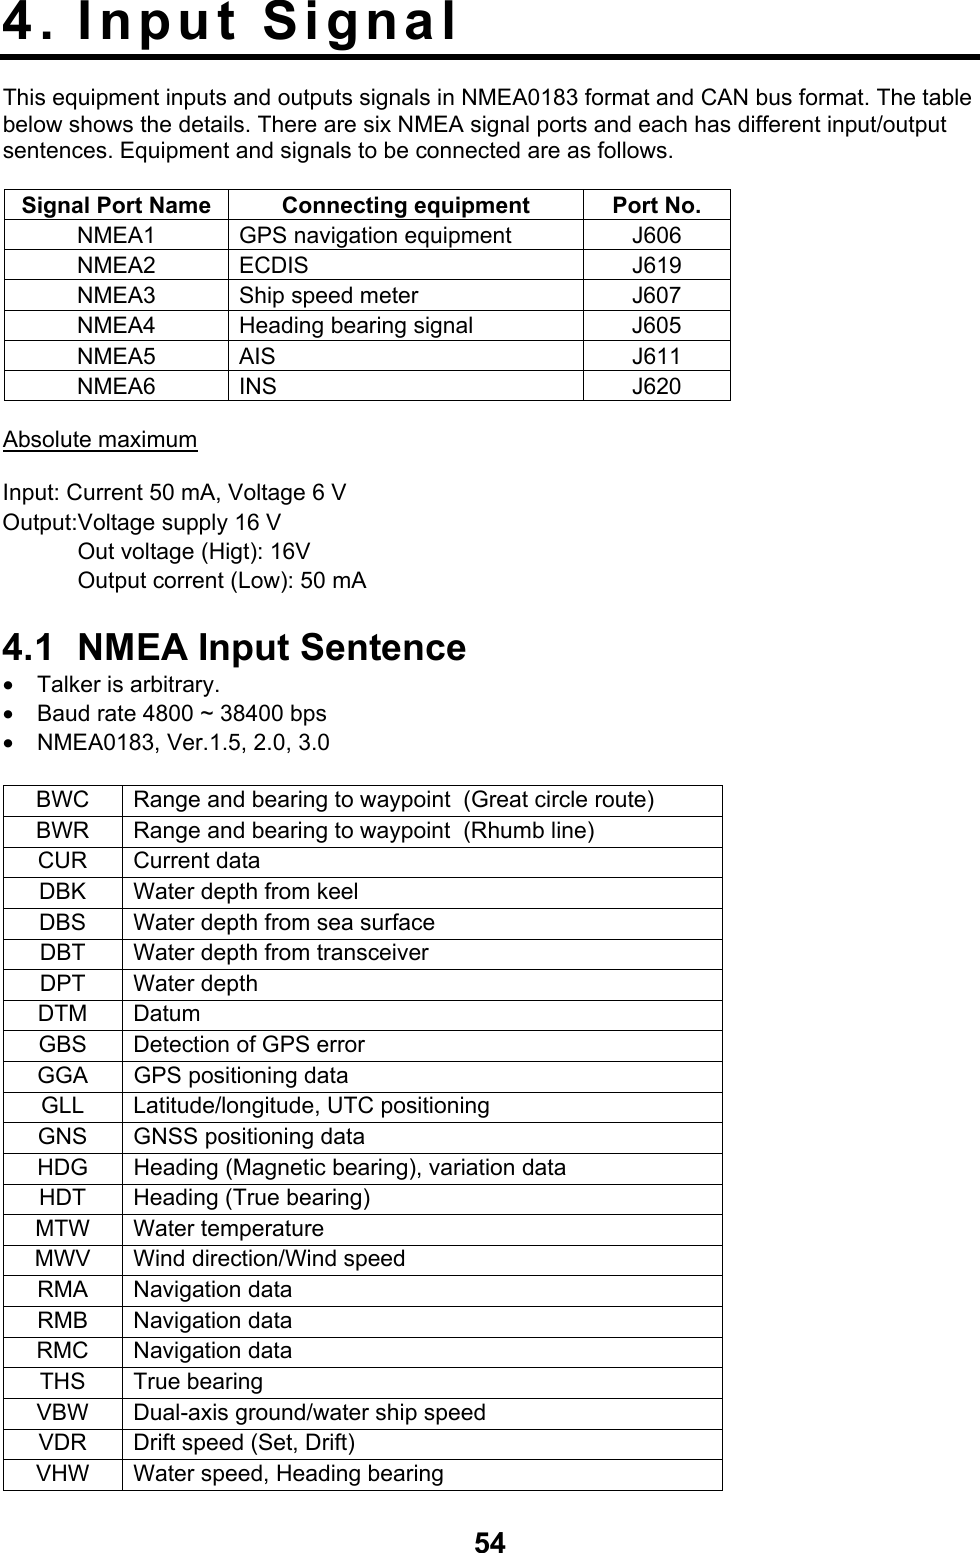  544. Input Signal This equipment inputs and outputs signals in NMEA0183 format and CAN bus format. The table below shows the details. There are six NMEA signal ports and each has different input/output sentences. Equipment and signals to be connected are as follows. Signal Port Name  Connecting equipment  Port No. NMEA1  GPS navigation equipment  J606 NMEA2 ECDIS  J619 NMEA3 Ship speed meter  J607 NMEA4  Heading bearing signal  J605 NMEA5 AIS  J611 NMEA6 INS  J620 Absolute maximum Input: Current 50 mA, Voltage 6 V Output: Voltage supply 16 V Out voltage (Higt): 16V Output corrent (Low): 50 mA 4.1  NMEA Input Sentence •  Talker is arbitrary. •  Baud rate 4800 ~ 38400 bps •  NMEA0183, Ver.1.5, 2.0, 3.0  BWC  Range and bearing to waypoint  (Great circle route) BWR  Range and bearing to waypoint  (Rhumb line) CUR Current data DBK  Water depth from keel DBS  Water depth from sea surface DBT  Water depth from transceiver DPT Water depth DTM Datum GBS  Detection of GPS error GGA  GPS positioning data GLL  Latitude/longitude, UTC positioning GNS  GNSS positioning data HDG  Heading (Magnetic bearing), variation data HDT  Heading (True bearing) MTW Water temperature MWV  Wind direction/Wind speed RMA Navigation data RMB Navigation data RMC Navigation data THS True bearing VBW  Dual-axis ground/water ship speed VDR  Drift speed (Set, Drift) VHW  Water speed, Heading bearing 